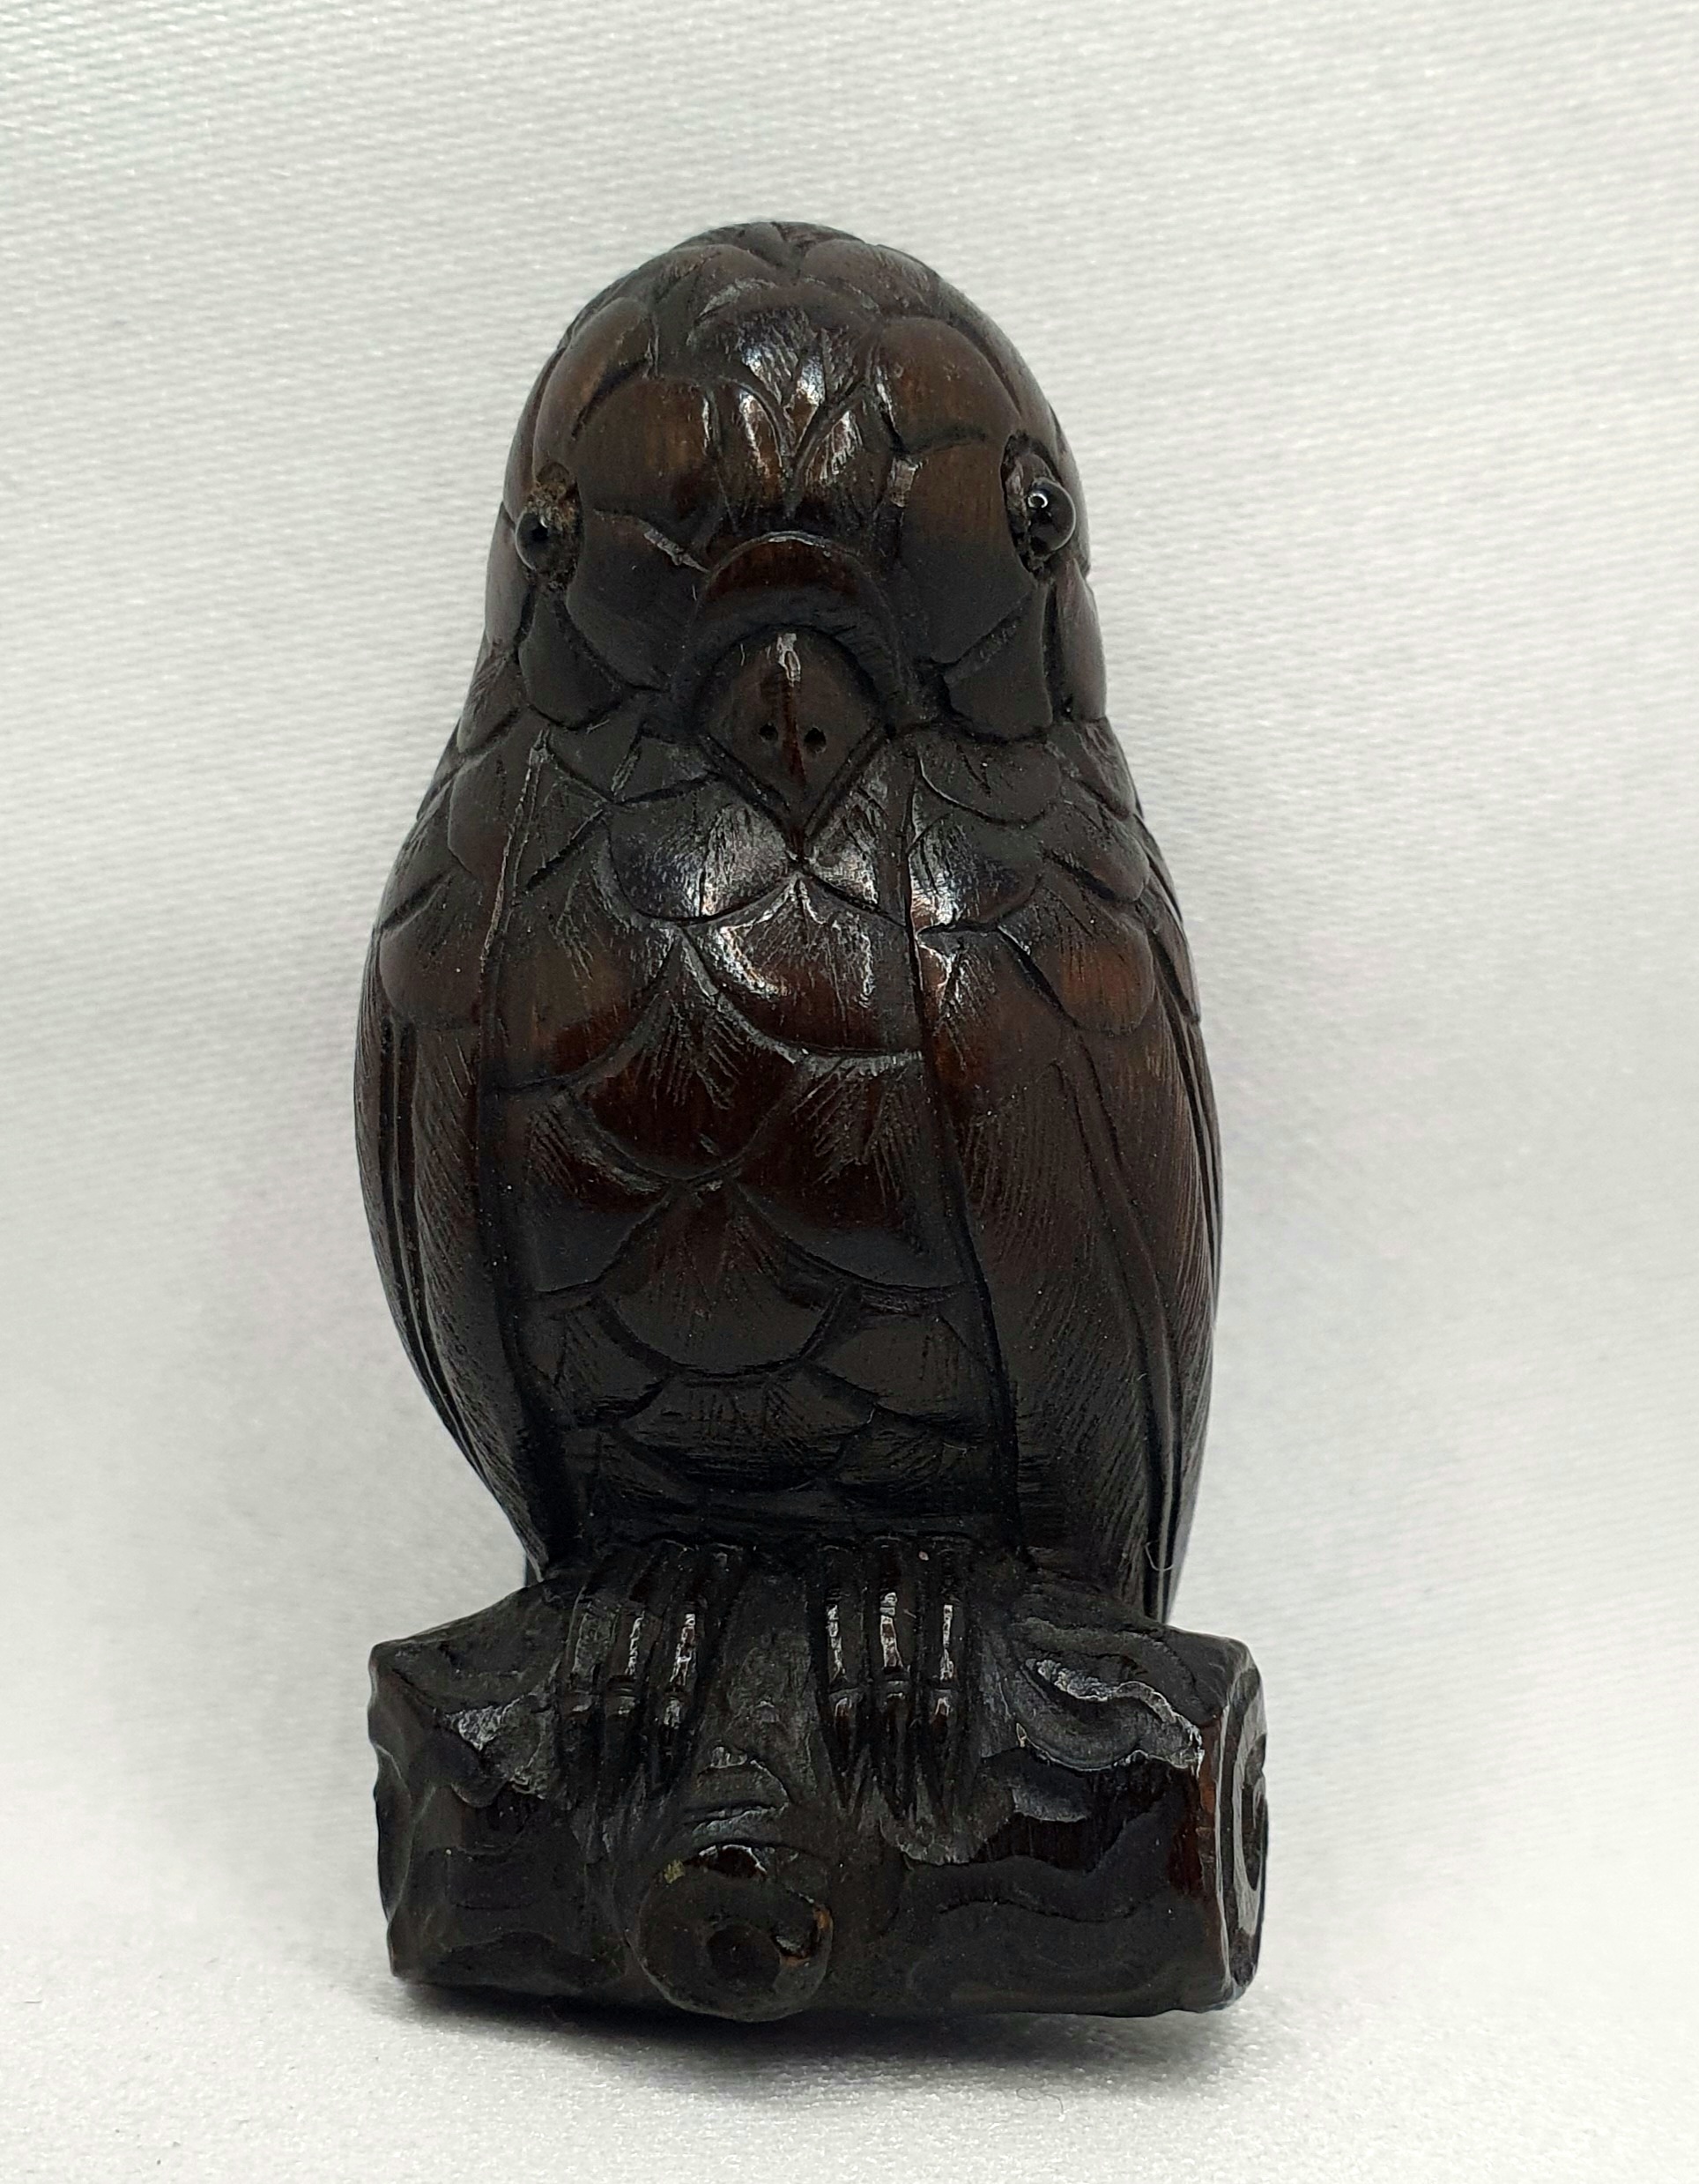 Japanese Wooden Netsuke carved as a Parrot - Image 2 of 2